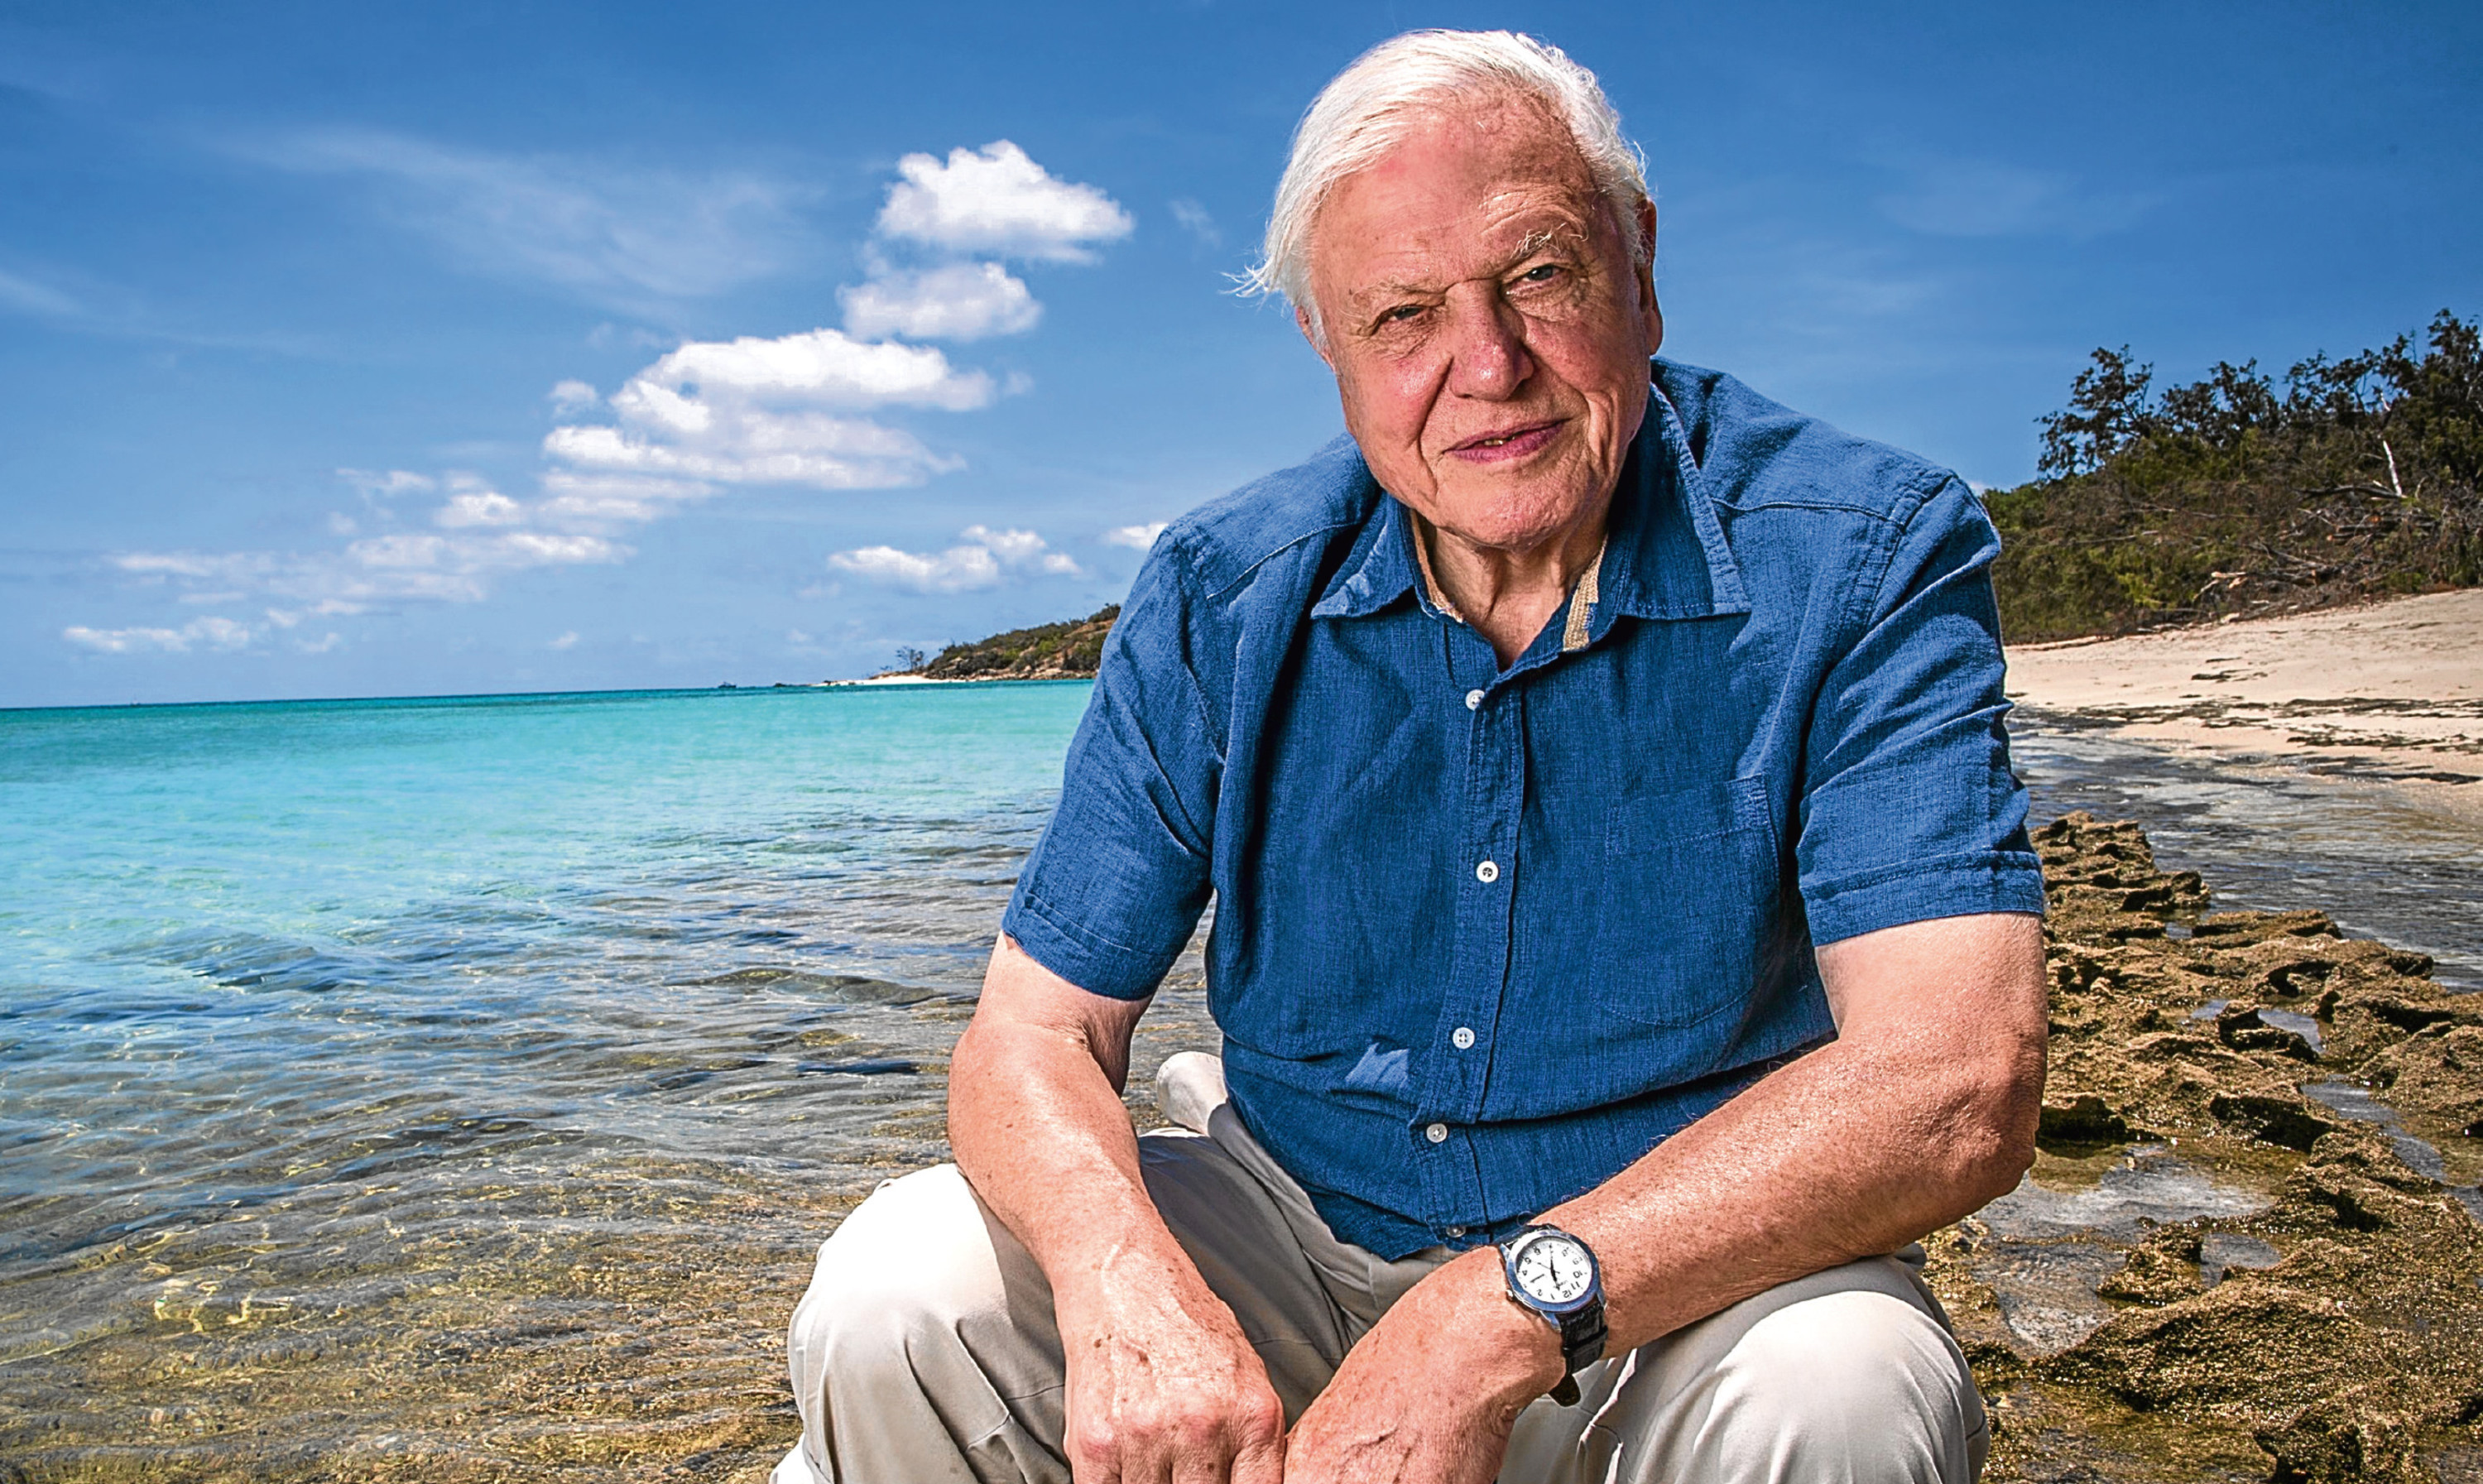 Lucy feels life for all of us would be much calmer and more reassuring if the voice of Sir David Attenborough could be heard more often.